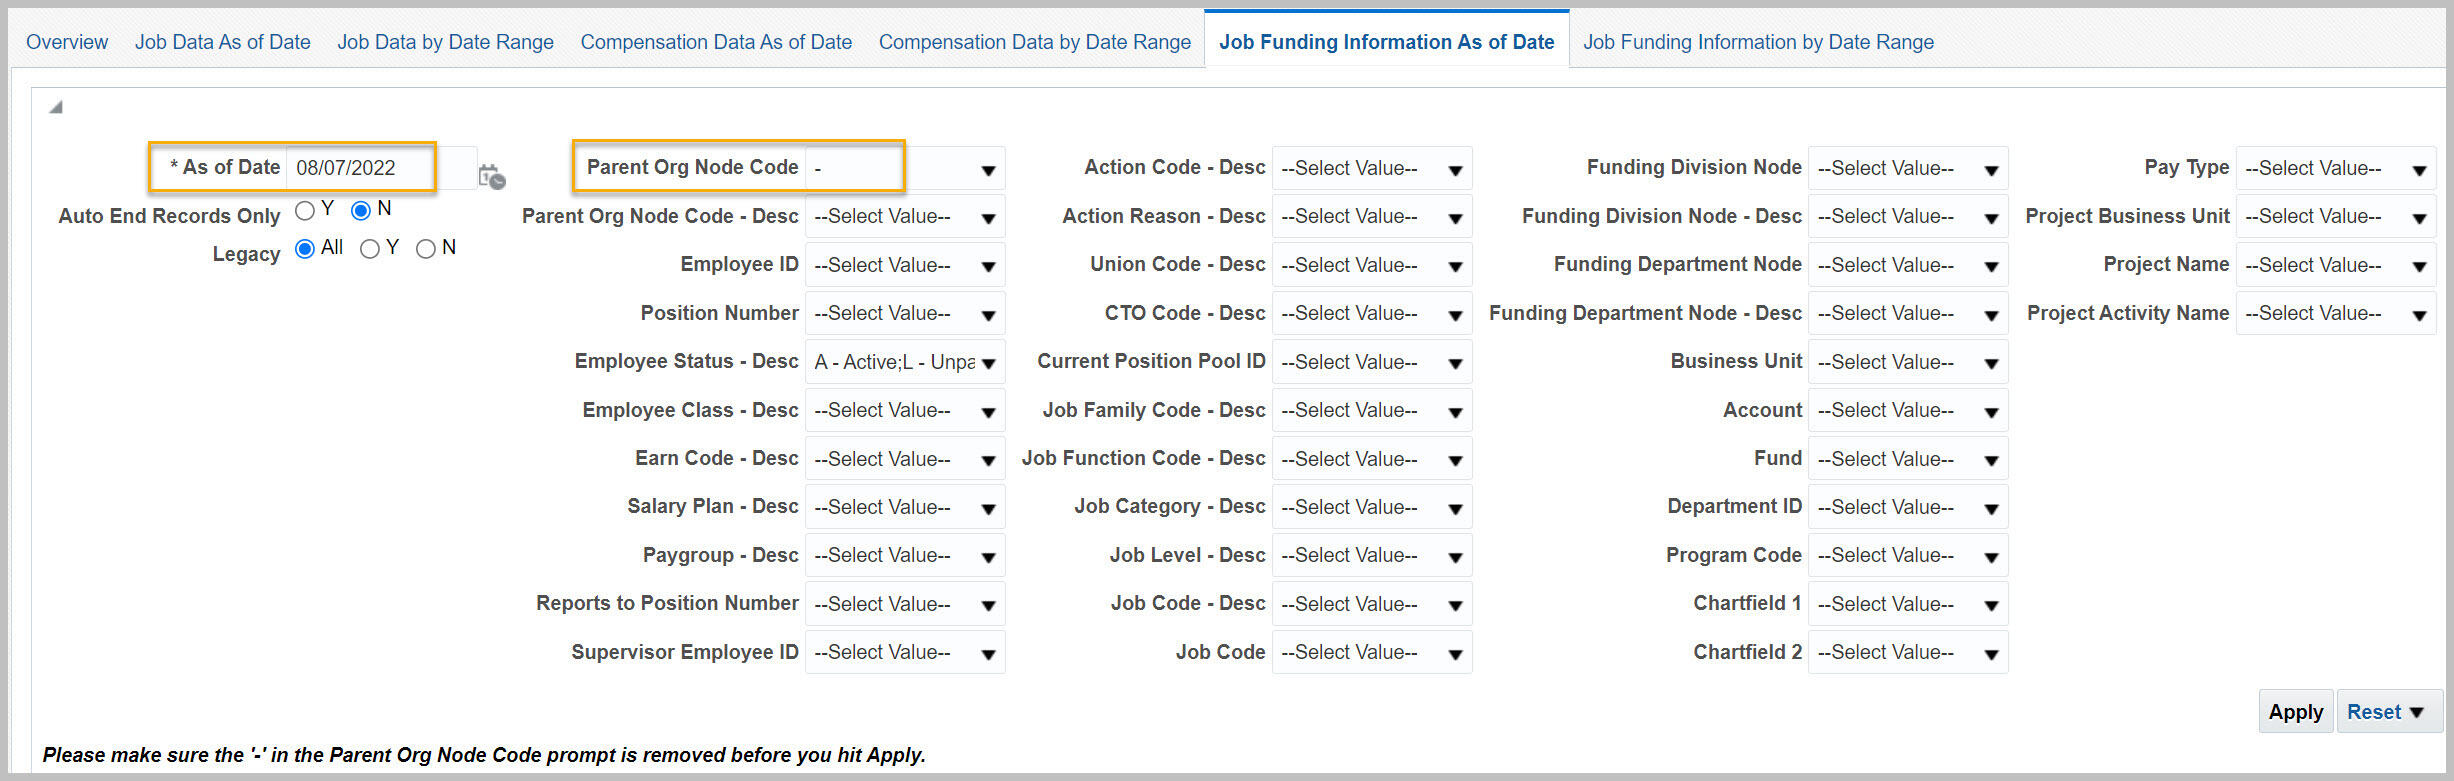 Filters for Workforce Detail, Job Funding Information As of Date